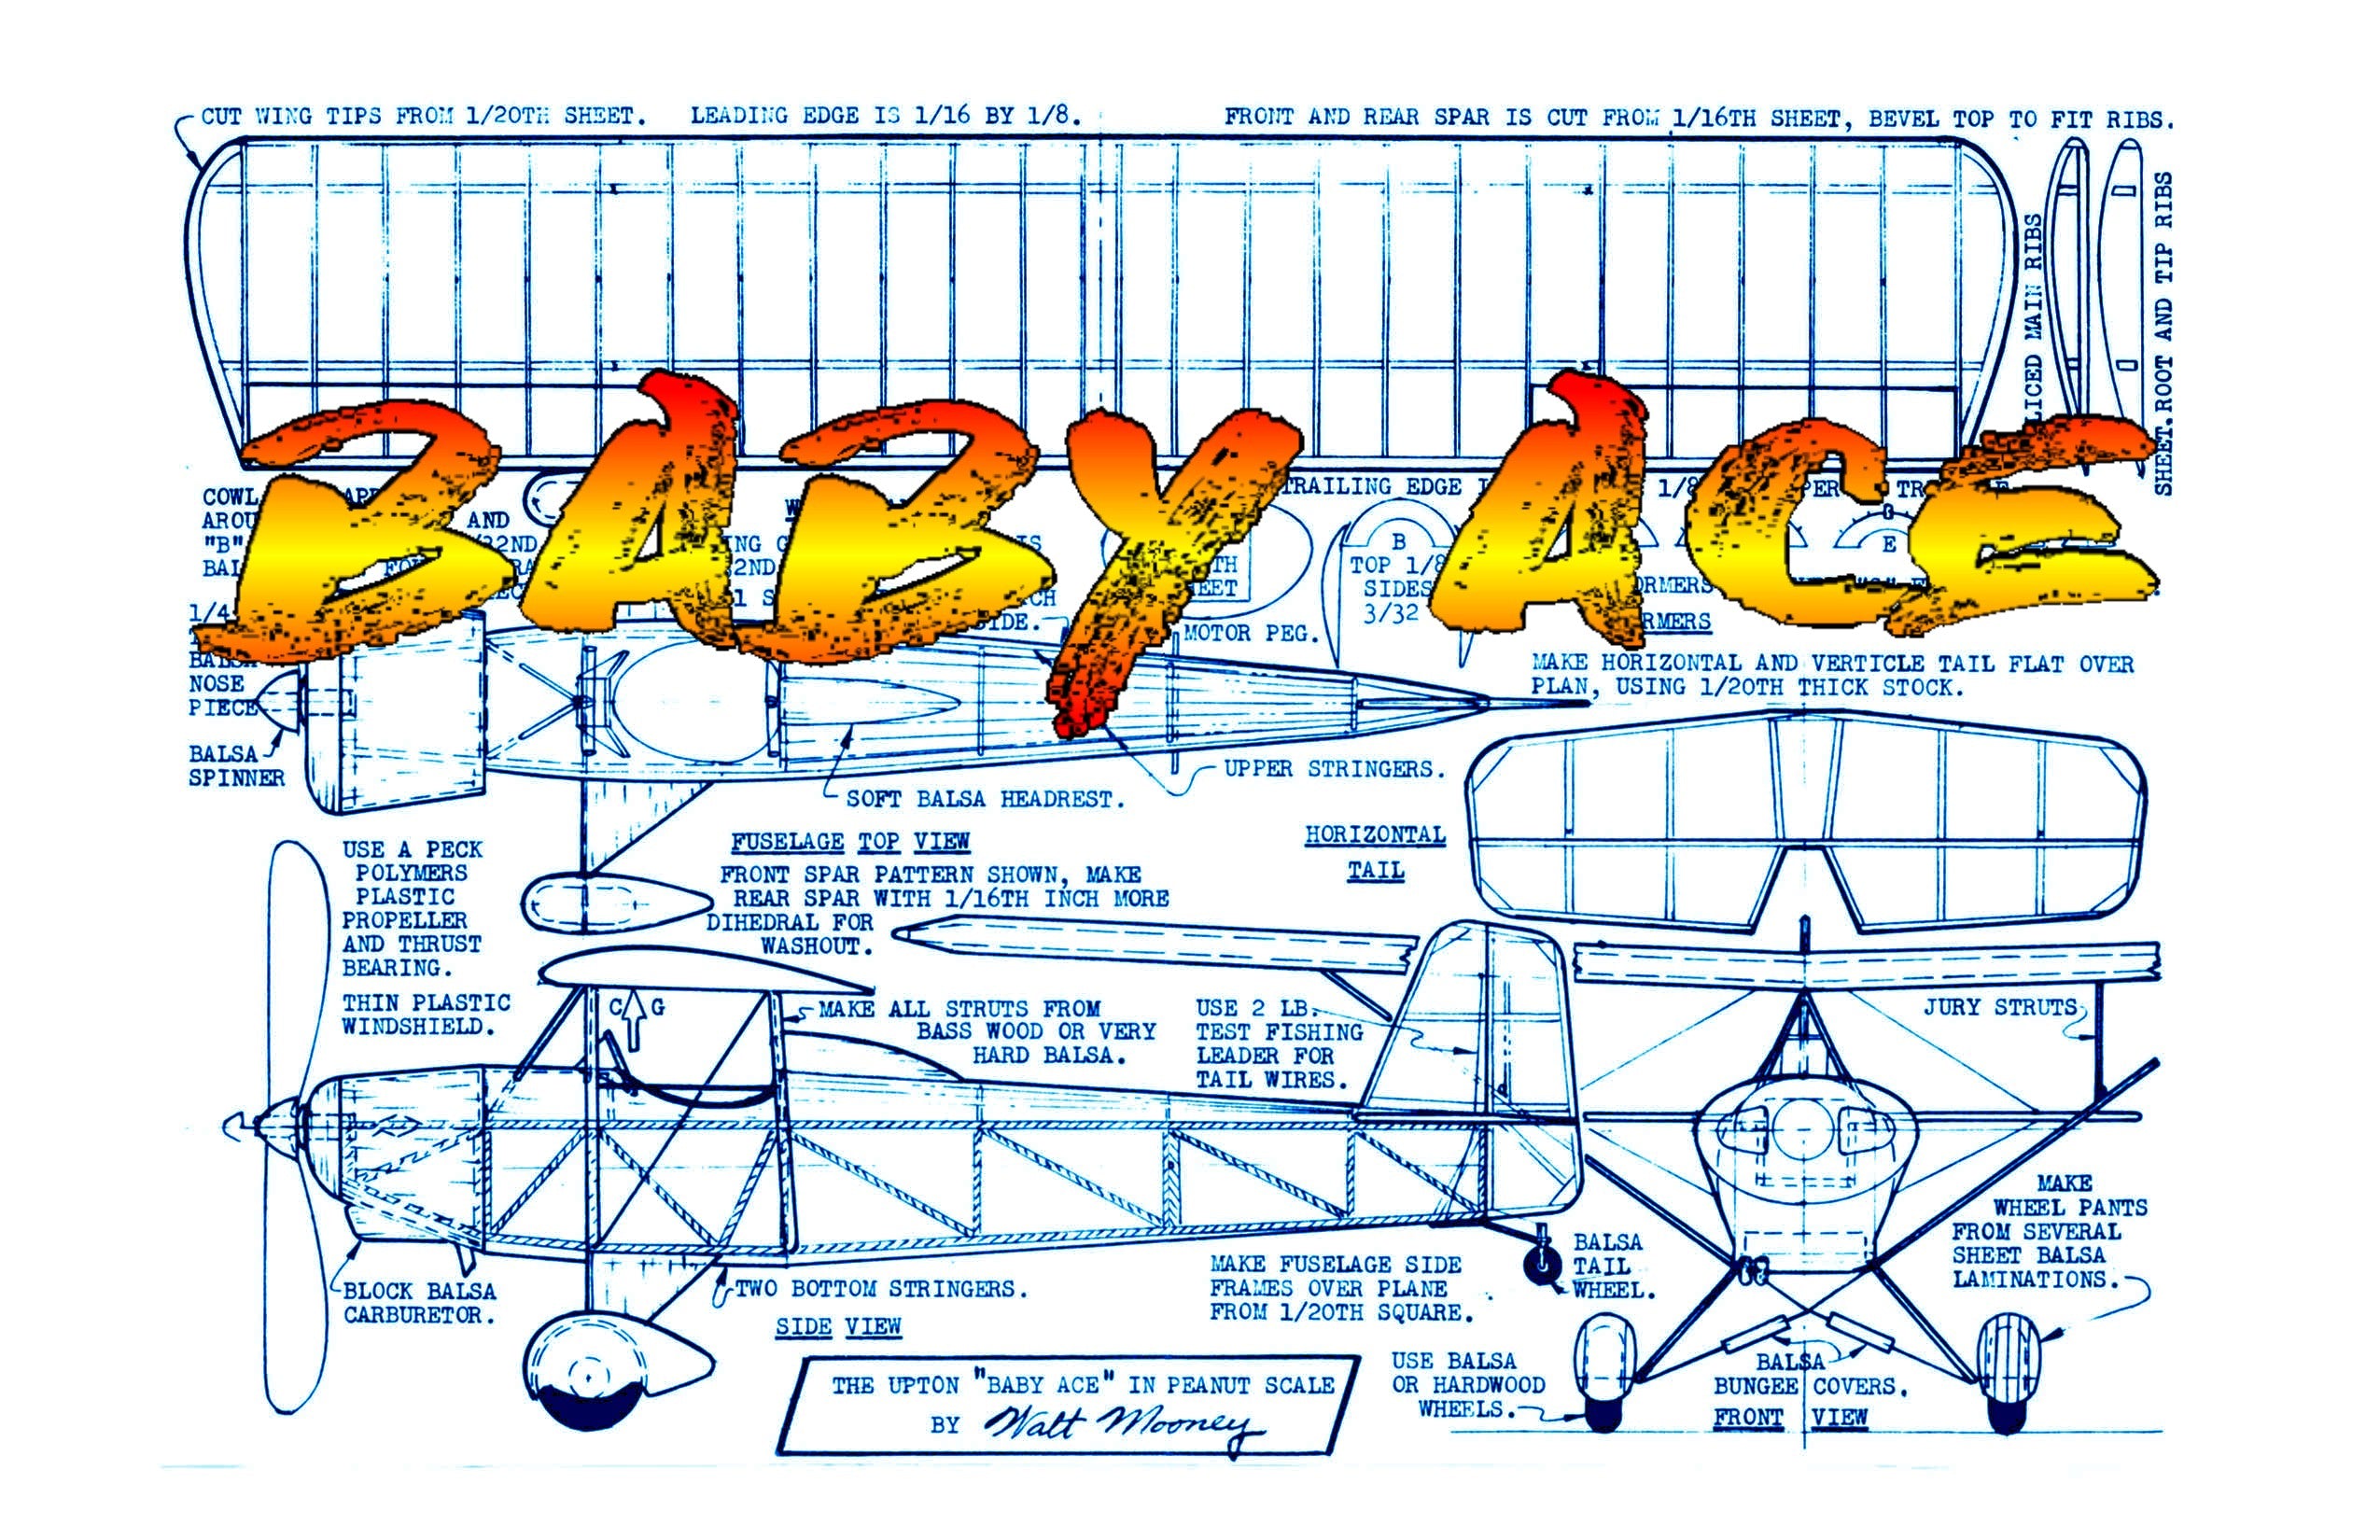 full size printed peanut scale plans  "baby ace" peanut required almost no flight trim adjustments.